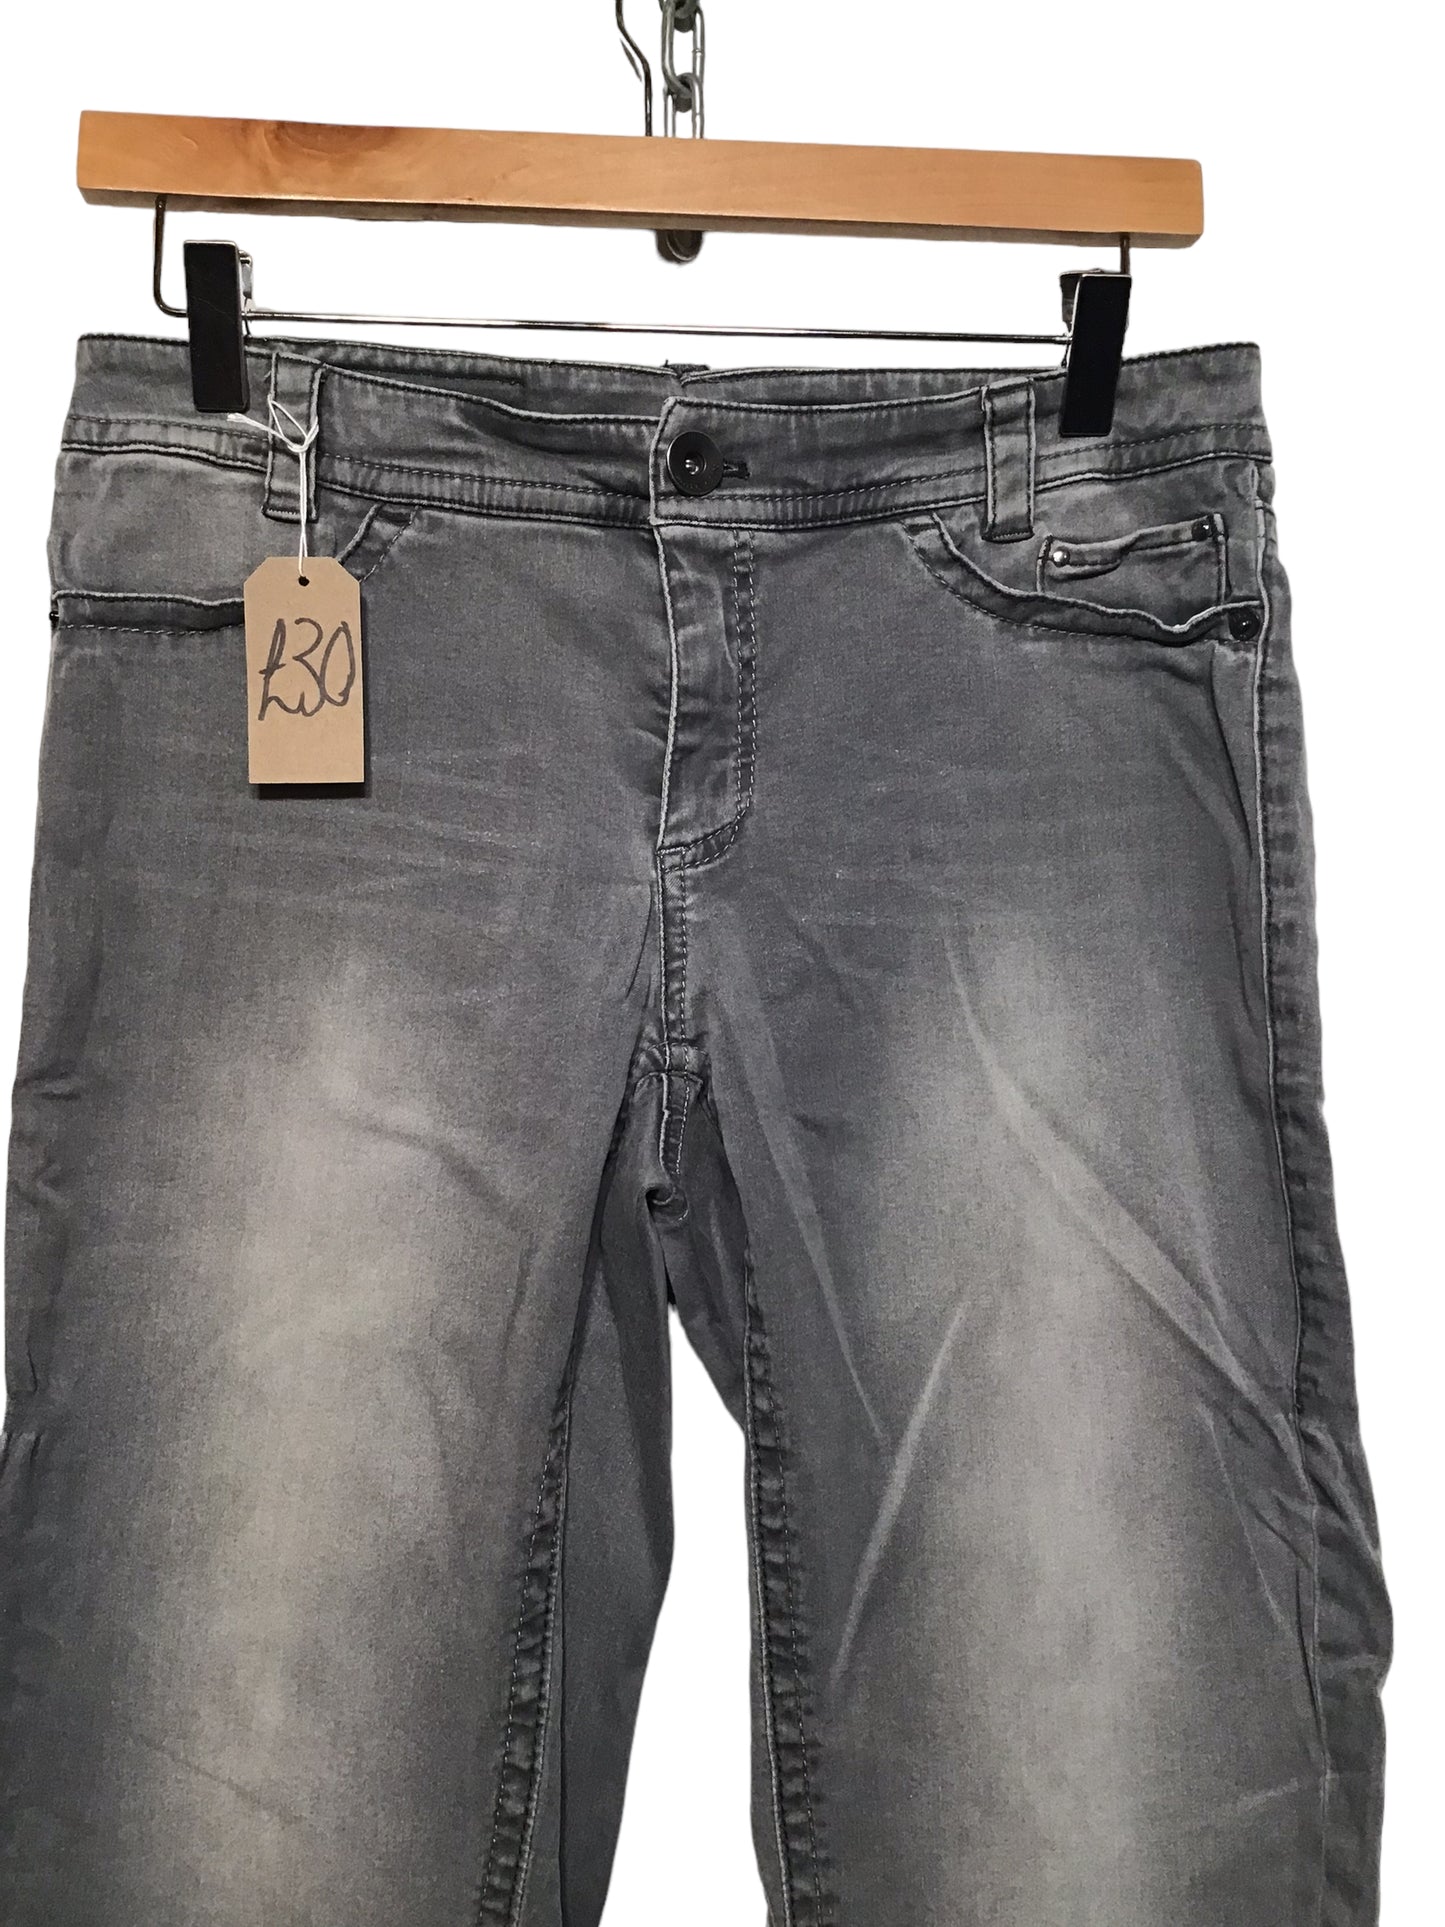 Marccain Jeans (31x30)